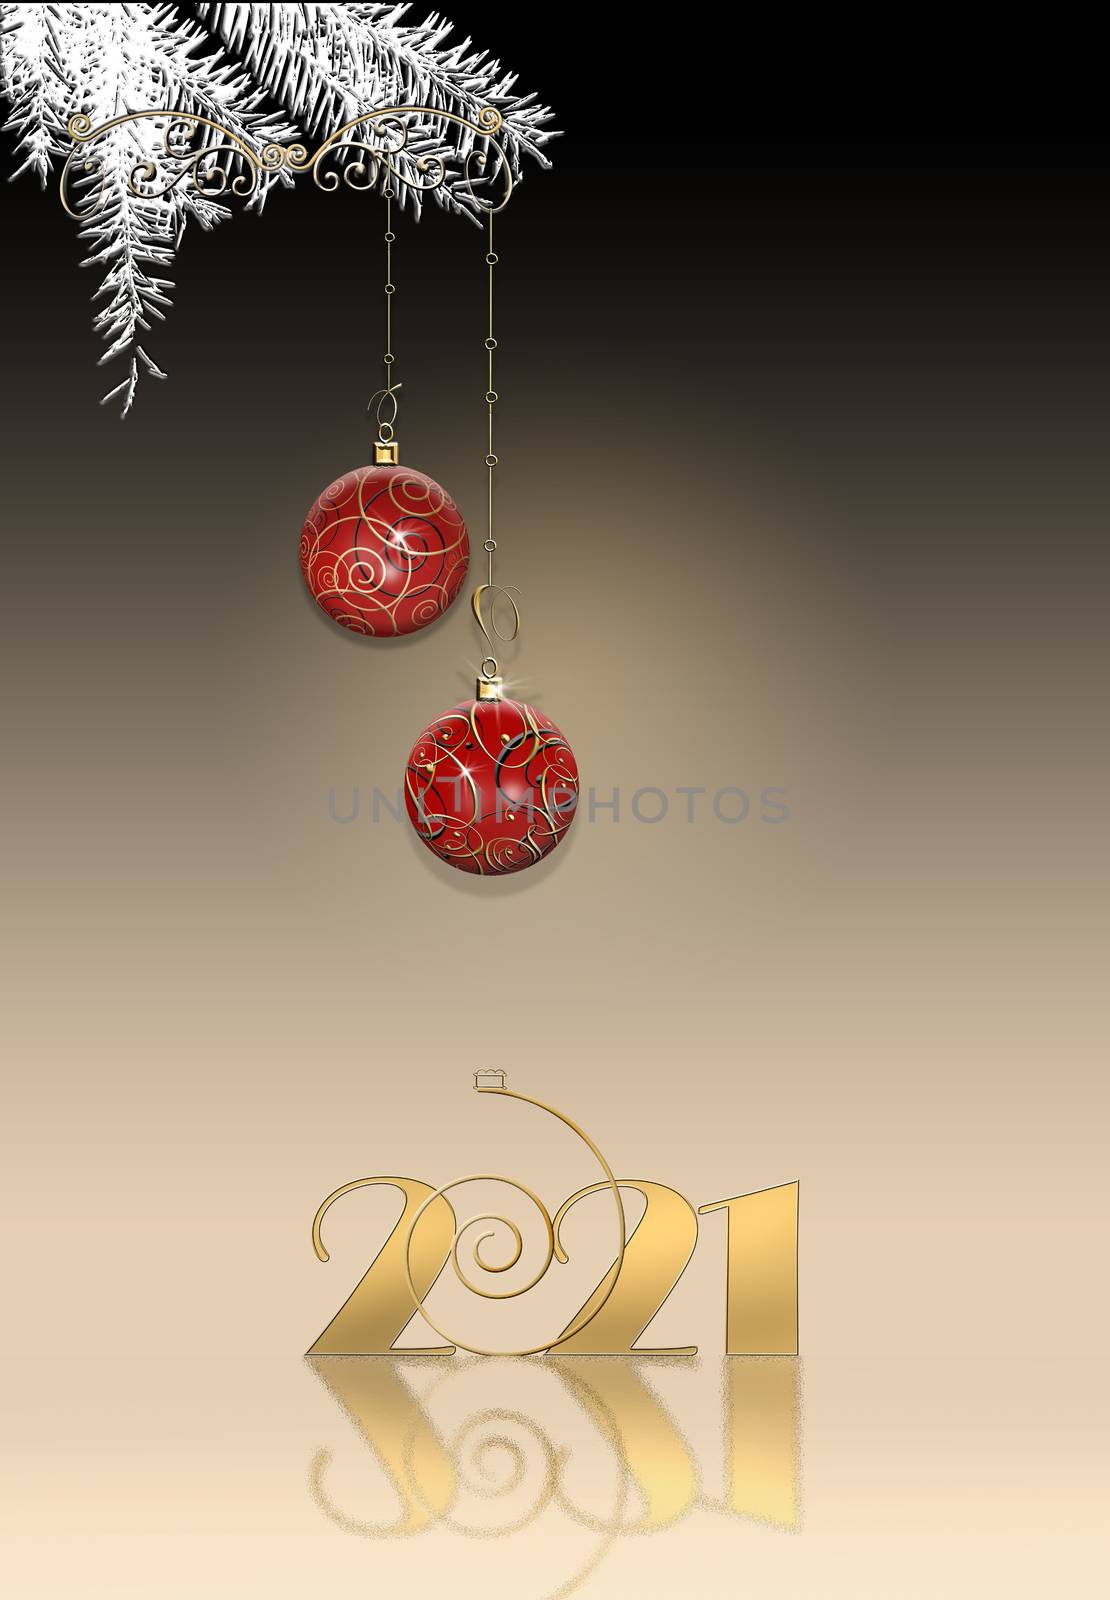 Luxury elegant Christmas 2021 New Year ornament with red gold bauble with gold confetti, digit 2021 on black background. Vertical 2021 New Year card. Place for text, copy space. 3D Illustration.